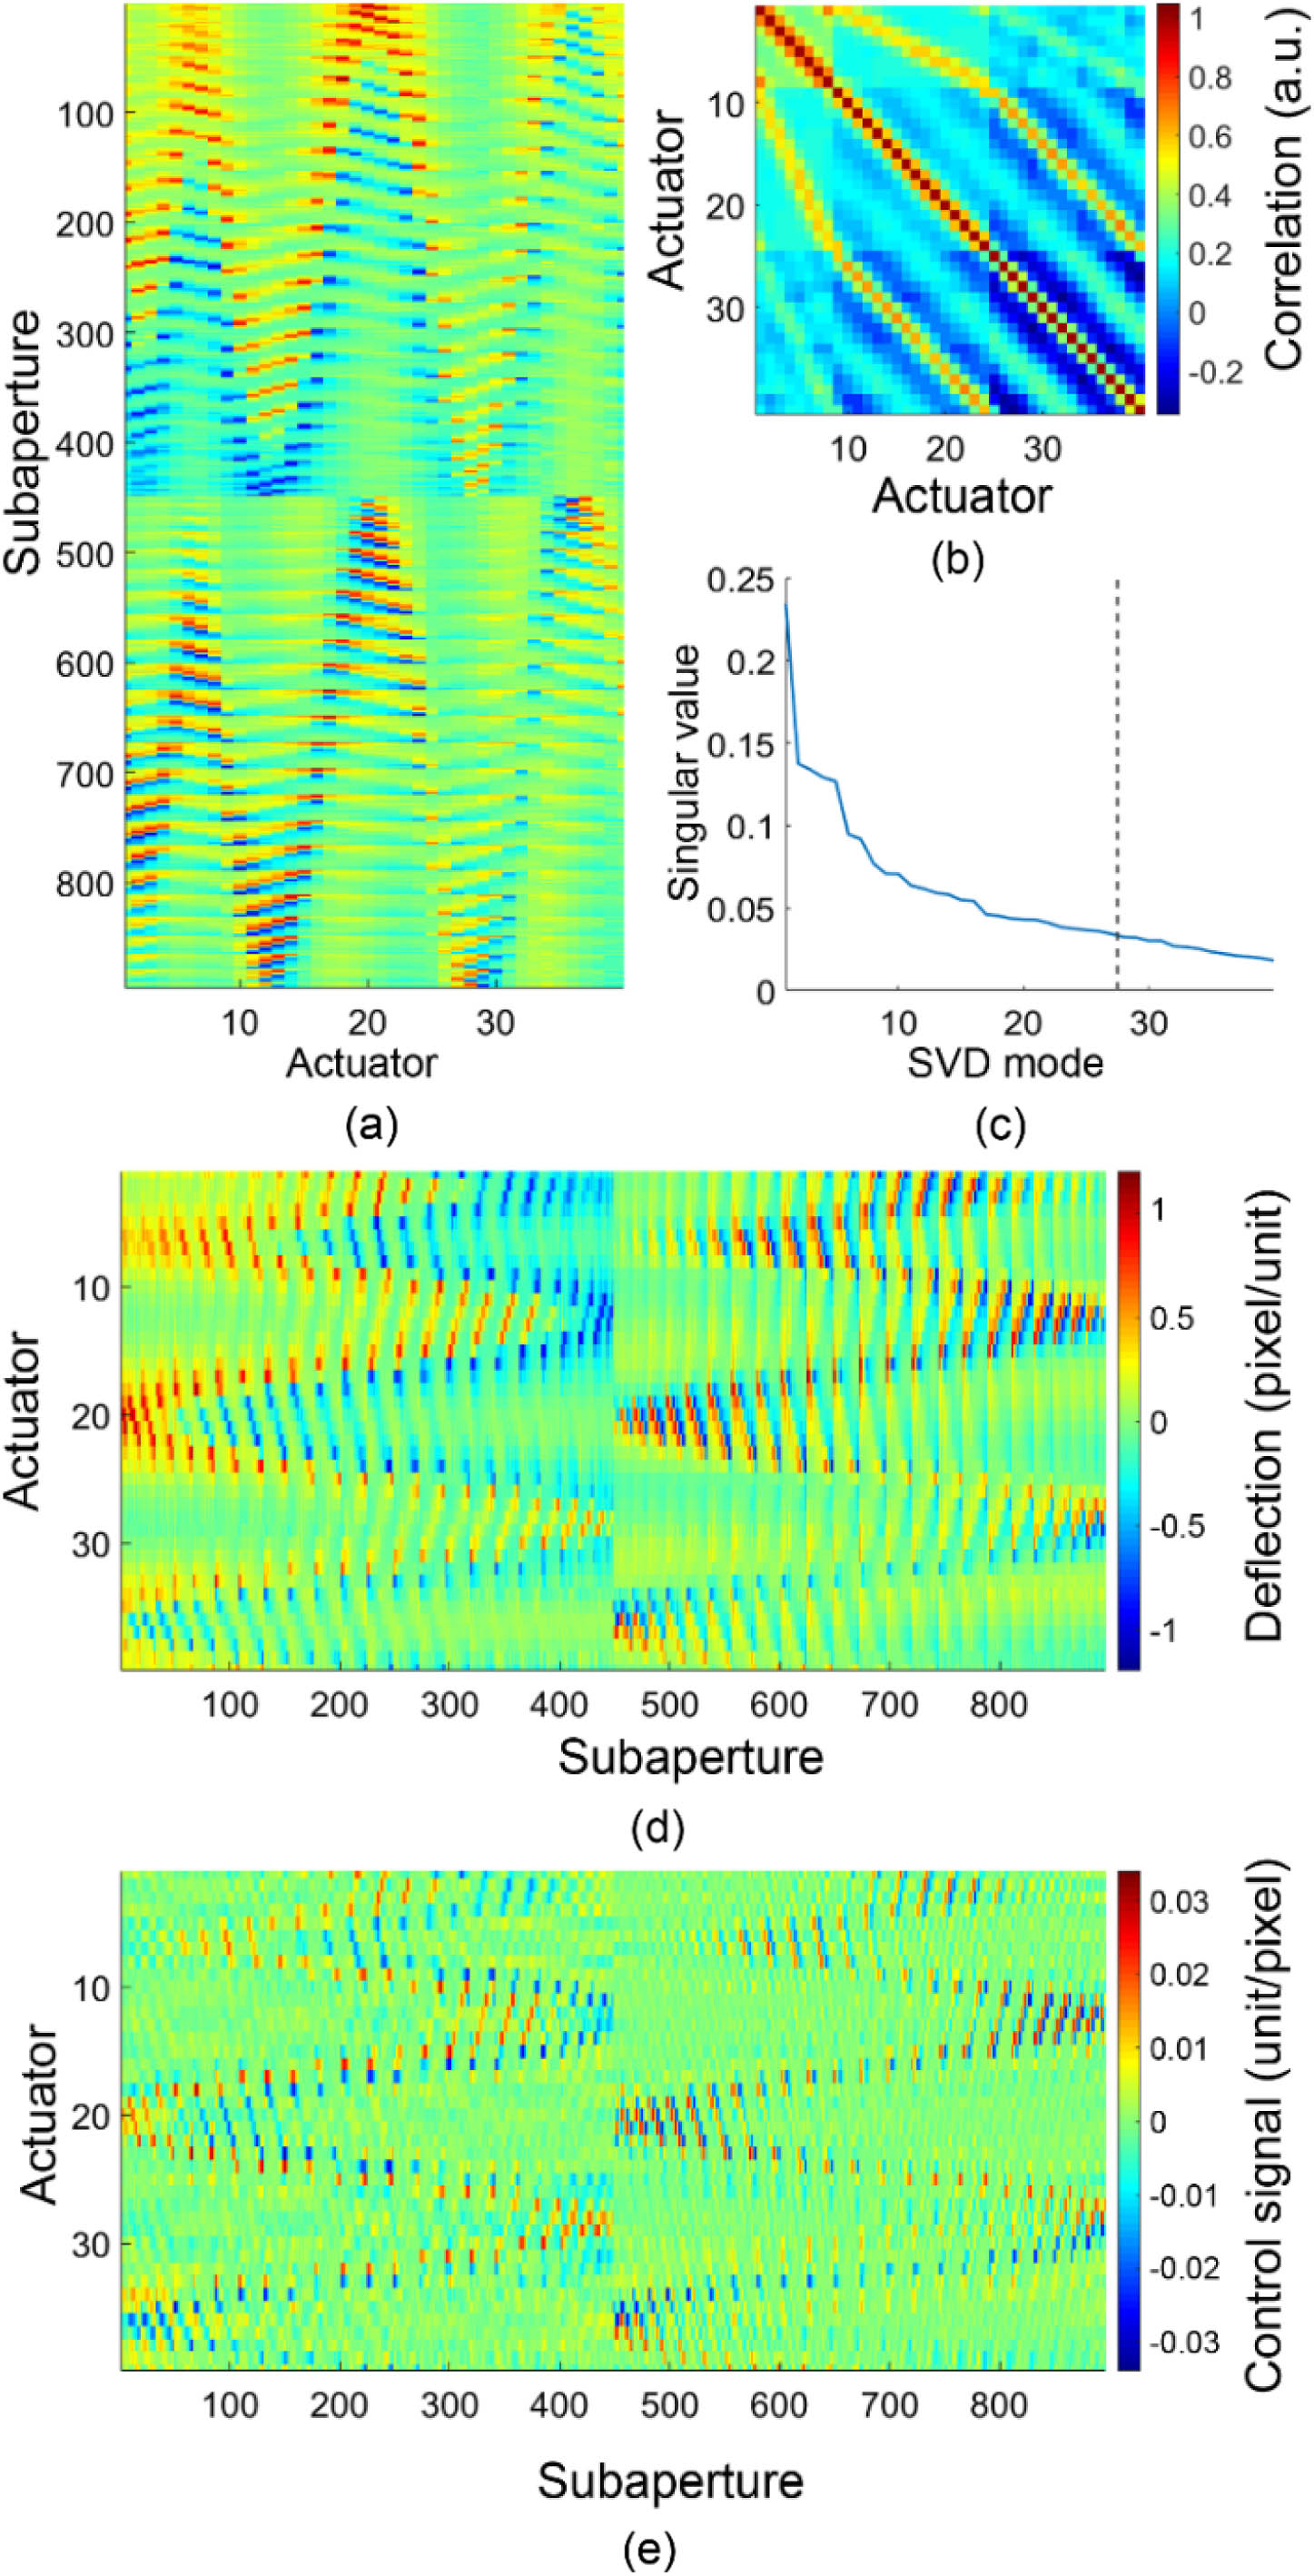 Influence function of the adaptive optics testing system with deformable mirror Thorlabs DMP40. (a) Influence function matrix (IFM). (b) Correlation matrix of IFM. (c) Singular values of the IFM, the dashed line indicates the optimal number of truncated singular values (modes). (d) Transpose matrix of IFM. (e) The inverse of the IFM with truncated singular value decomposition (TSVD) at the singular value indicated in (c). The color bar in (d) also applies to (a).